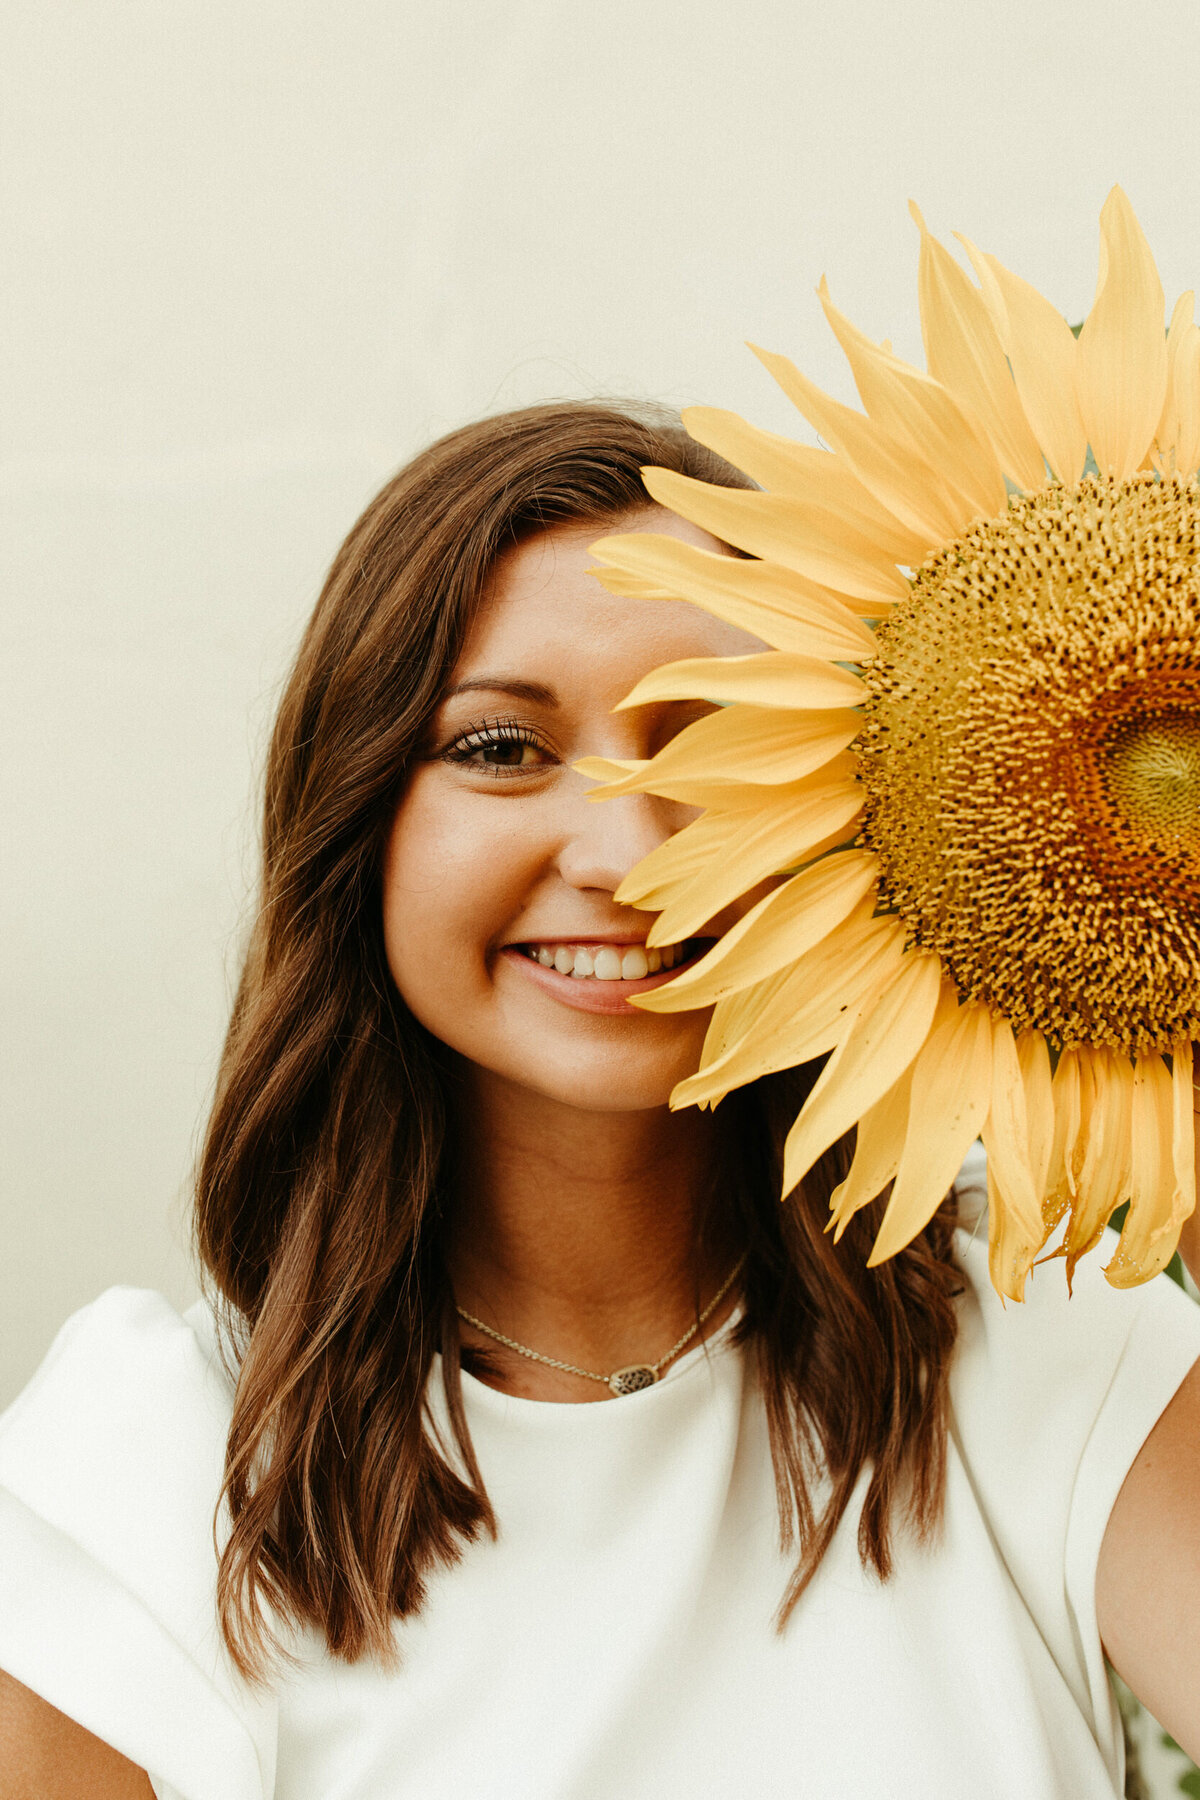 High school senior holding up a sunflower over half of her face